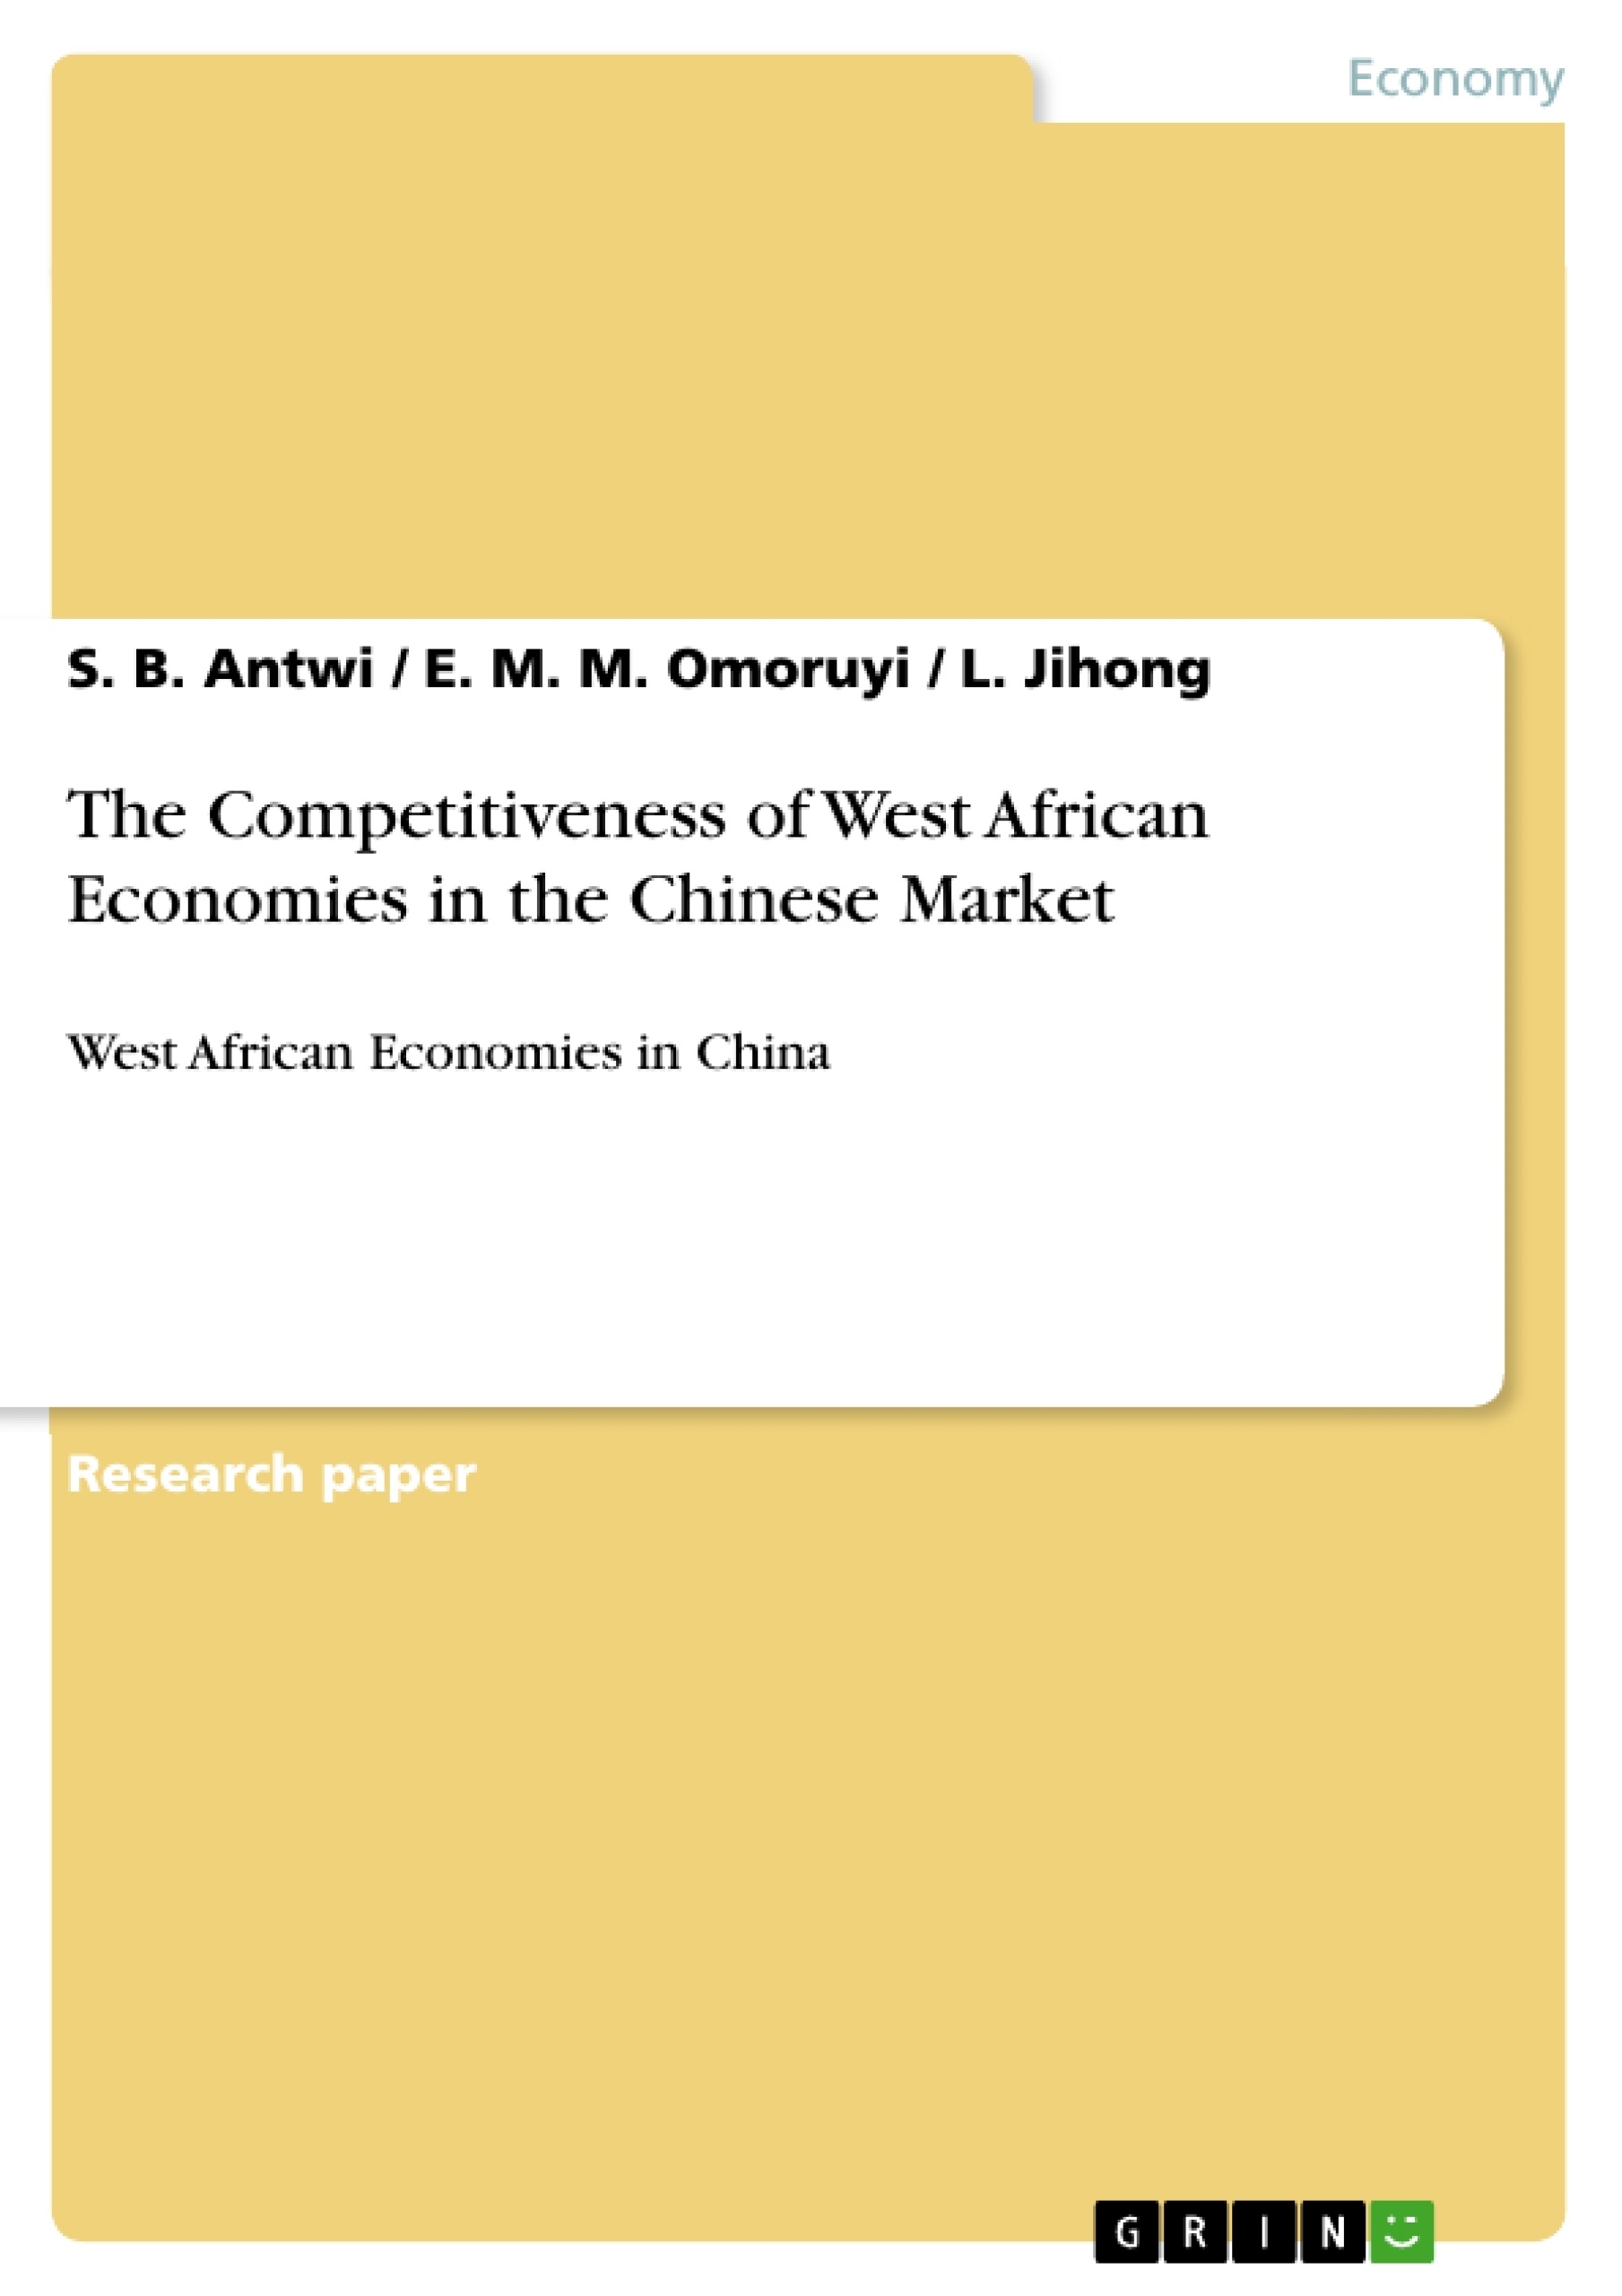 Titre: The Competitiveness of West African Economies in the Chinese Market